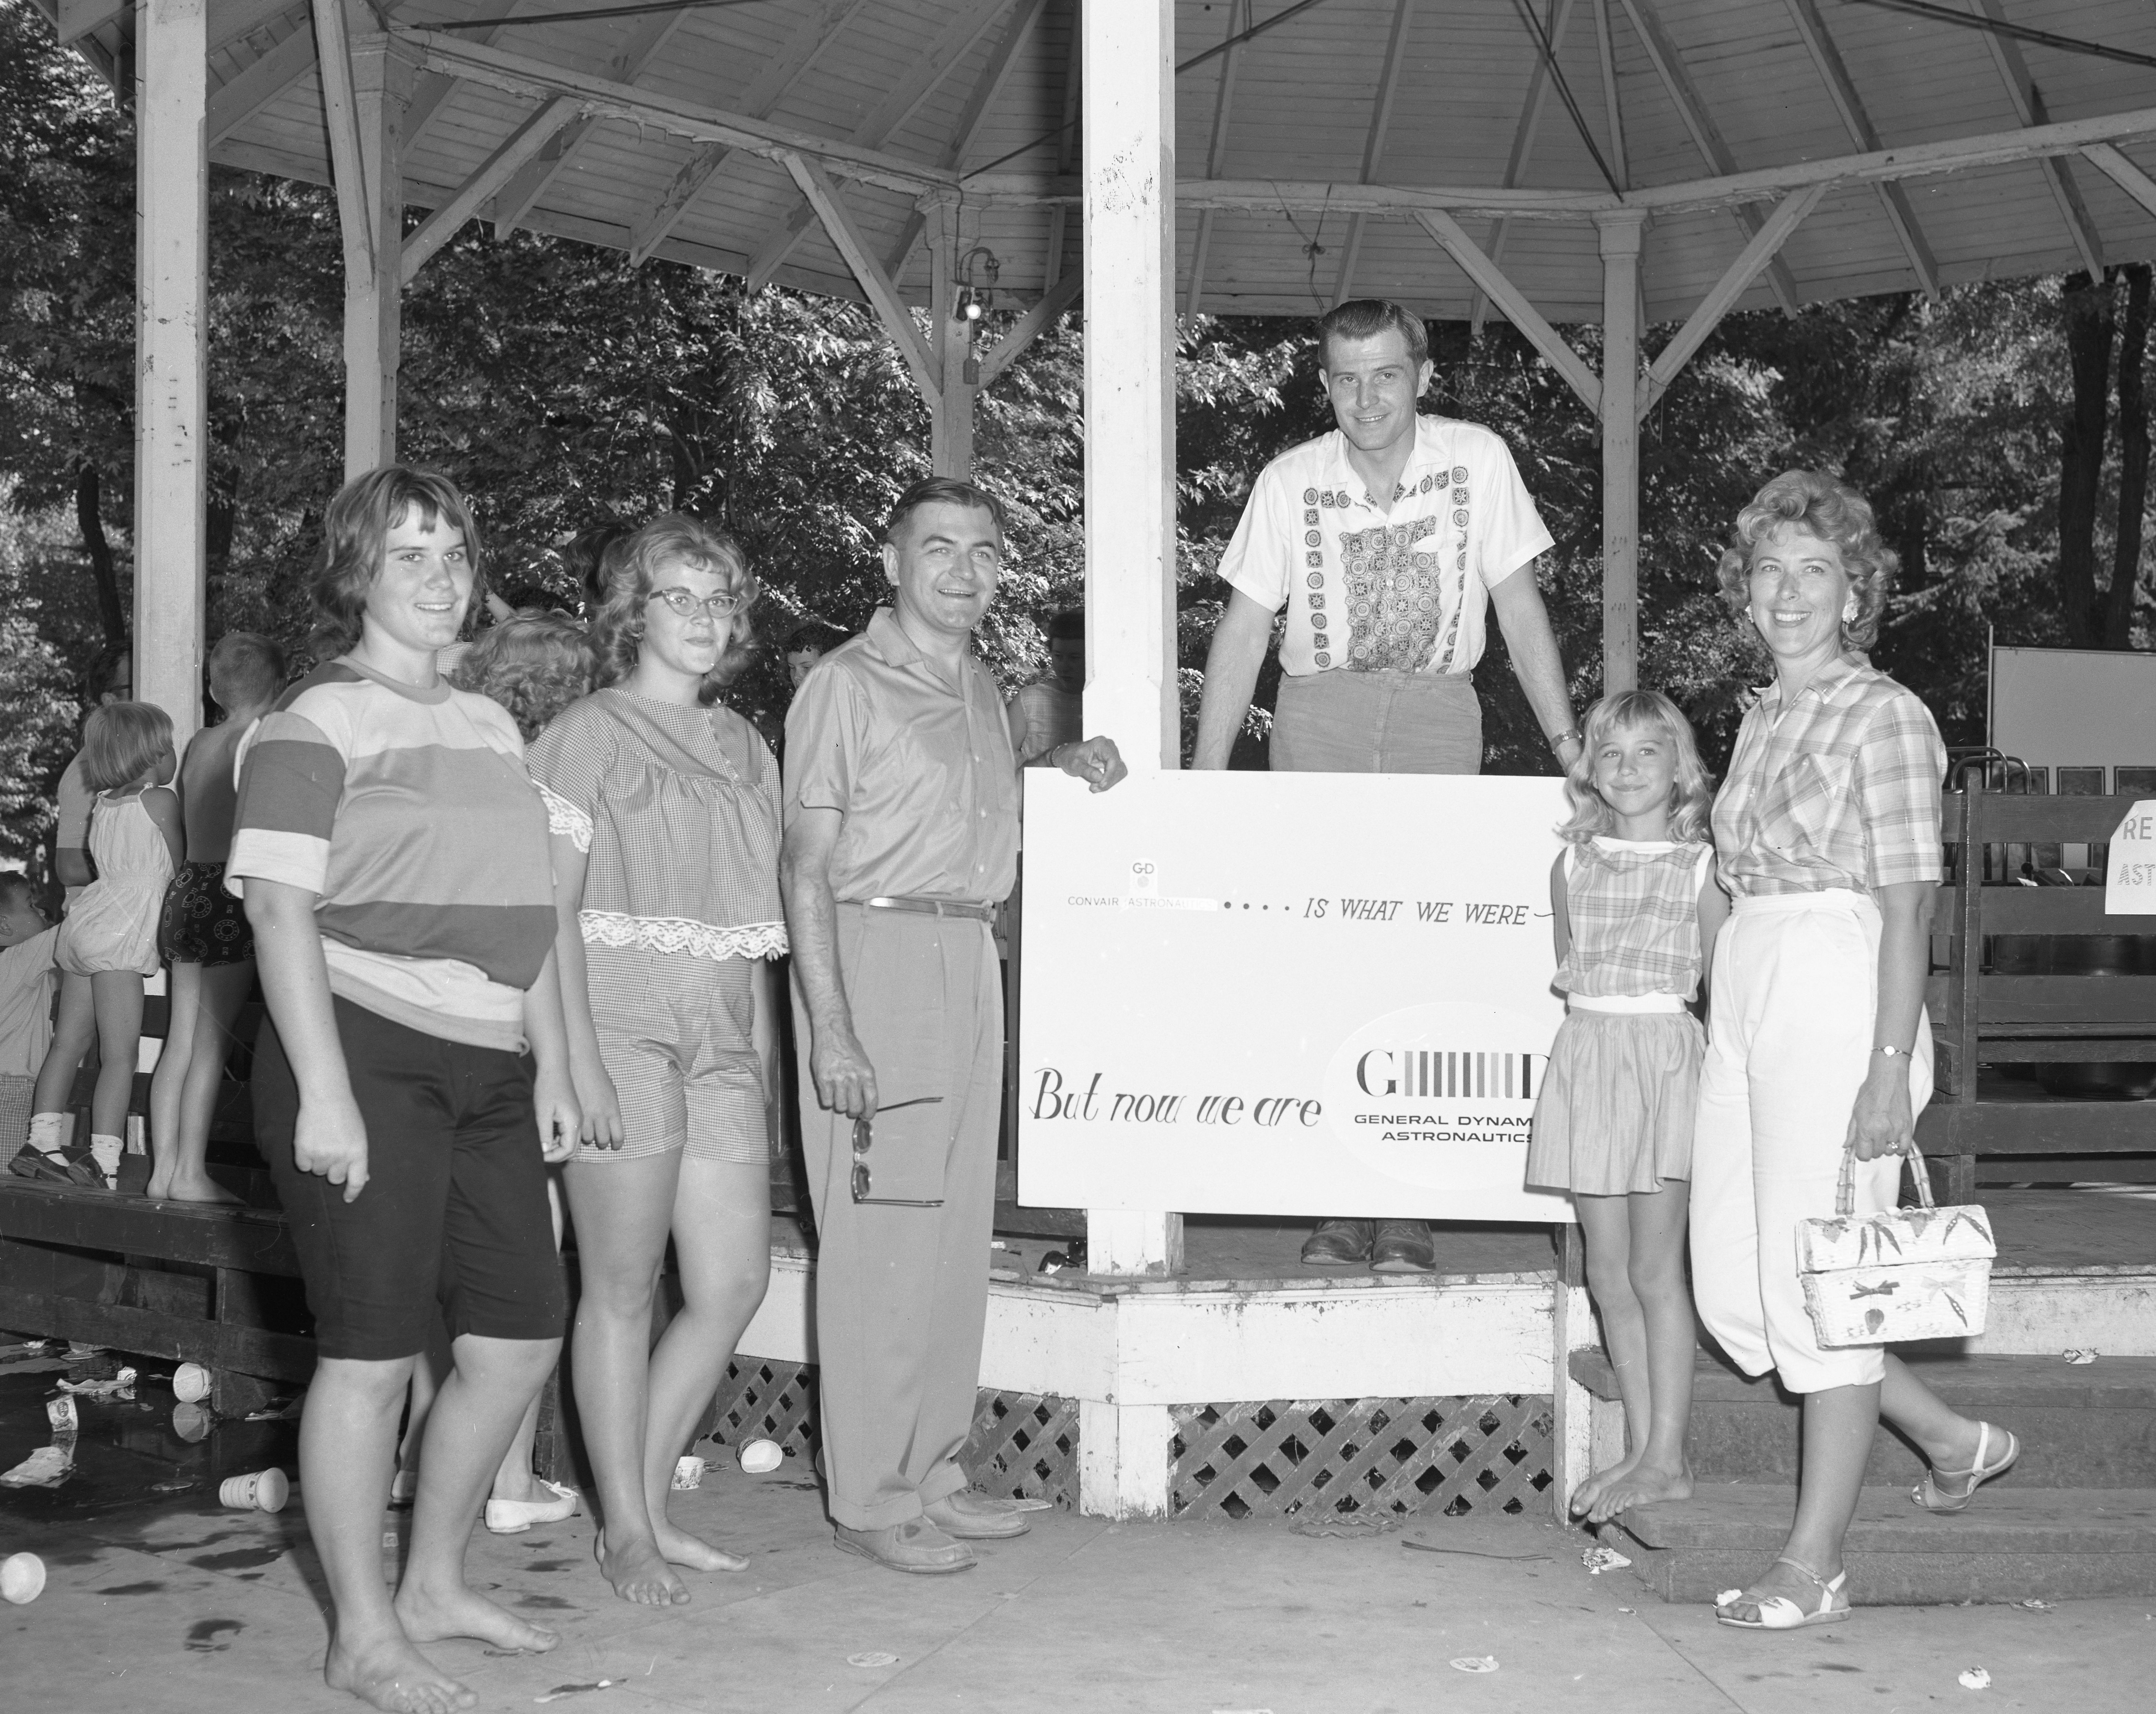 William F. Chana and his family with Cliff Clickner at the picnic.